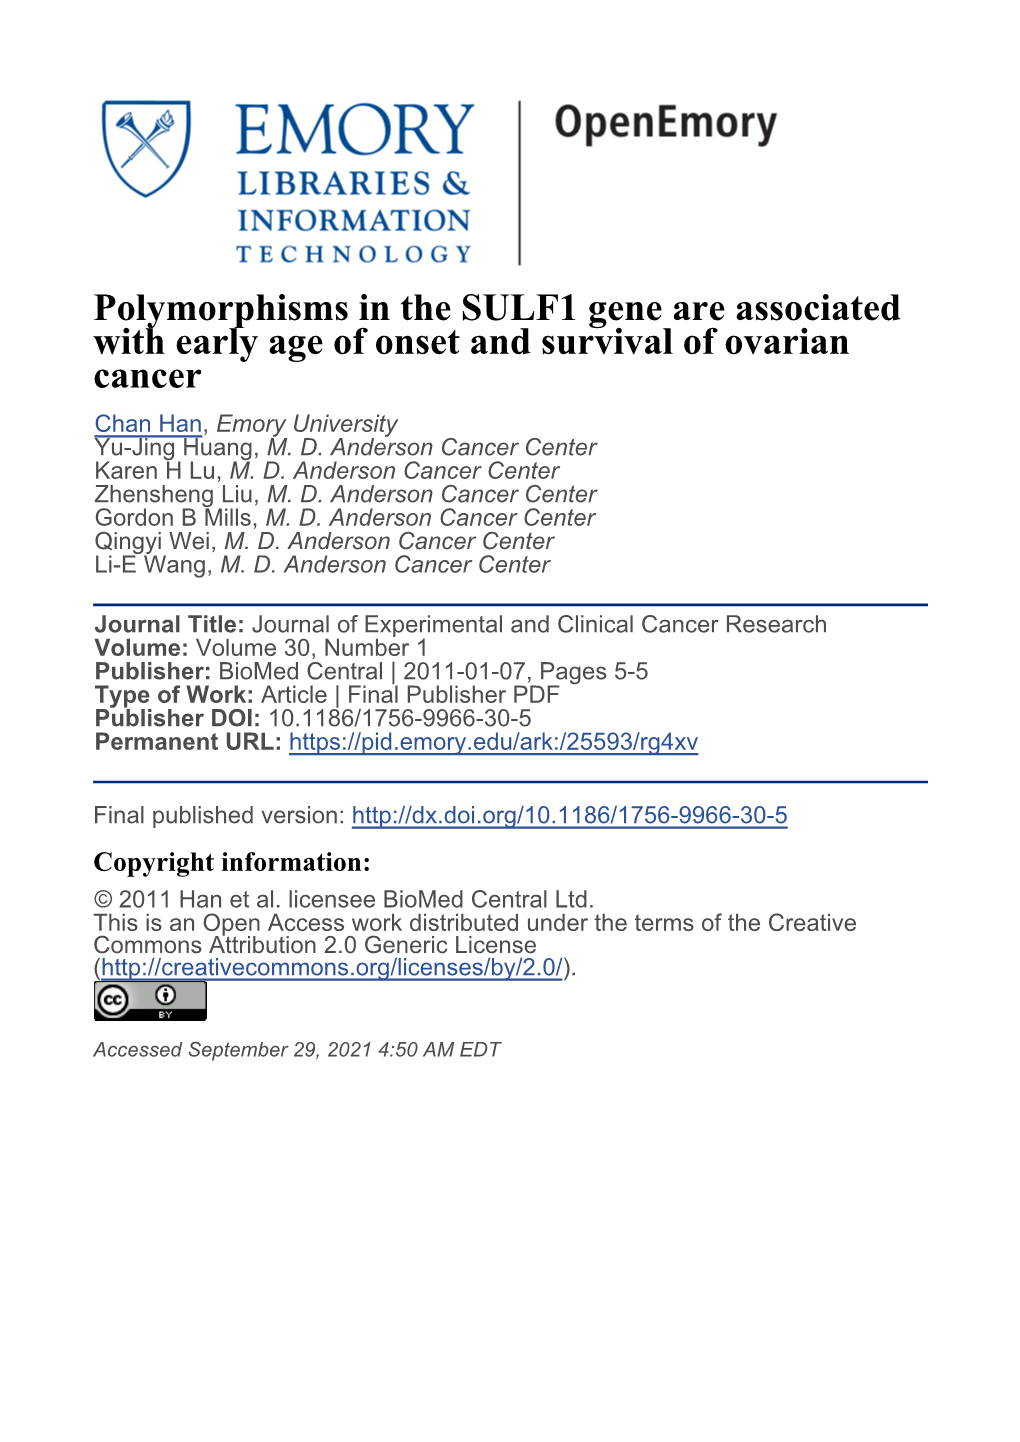 Polymorphisms in the SULF1 Gene Are Associated with Early Age of Onset and Survival of Ovarian Cancer Chan Han, Emory University Yu-Jing Huang, M